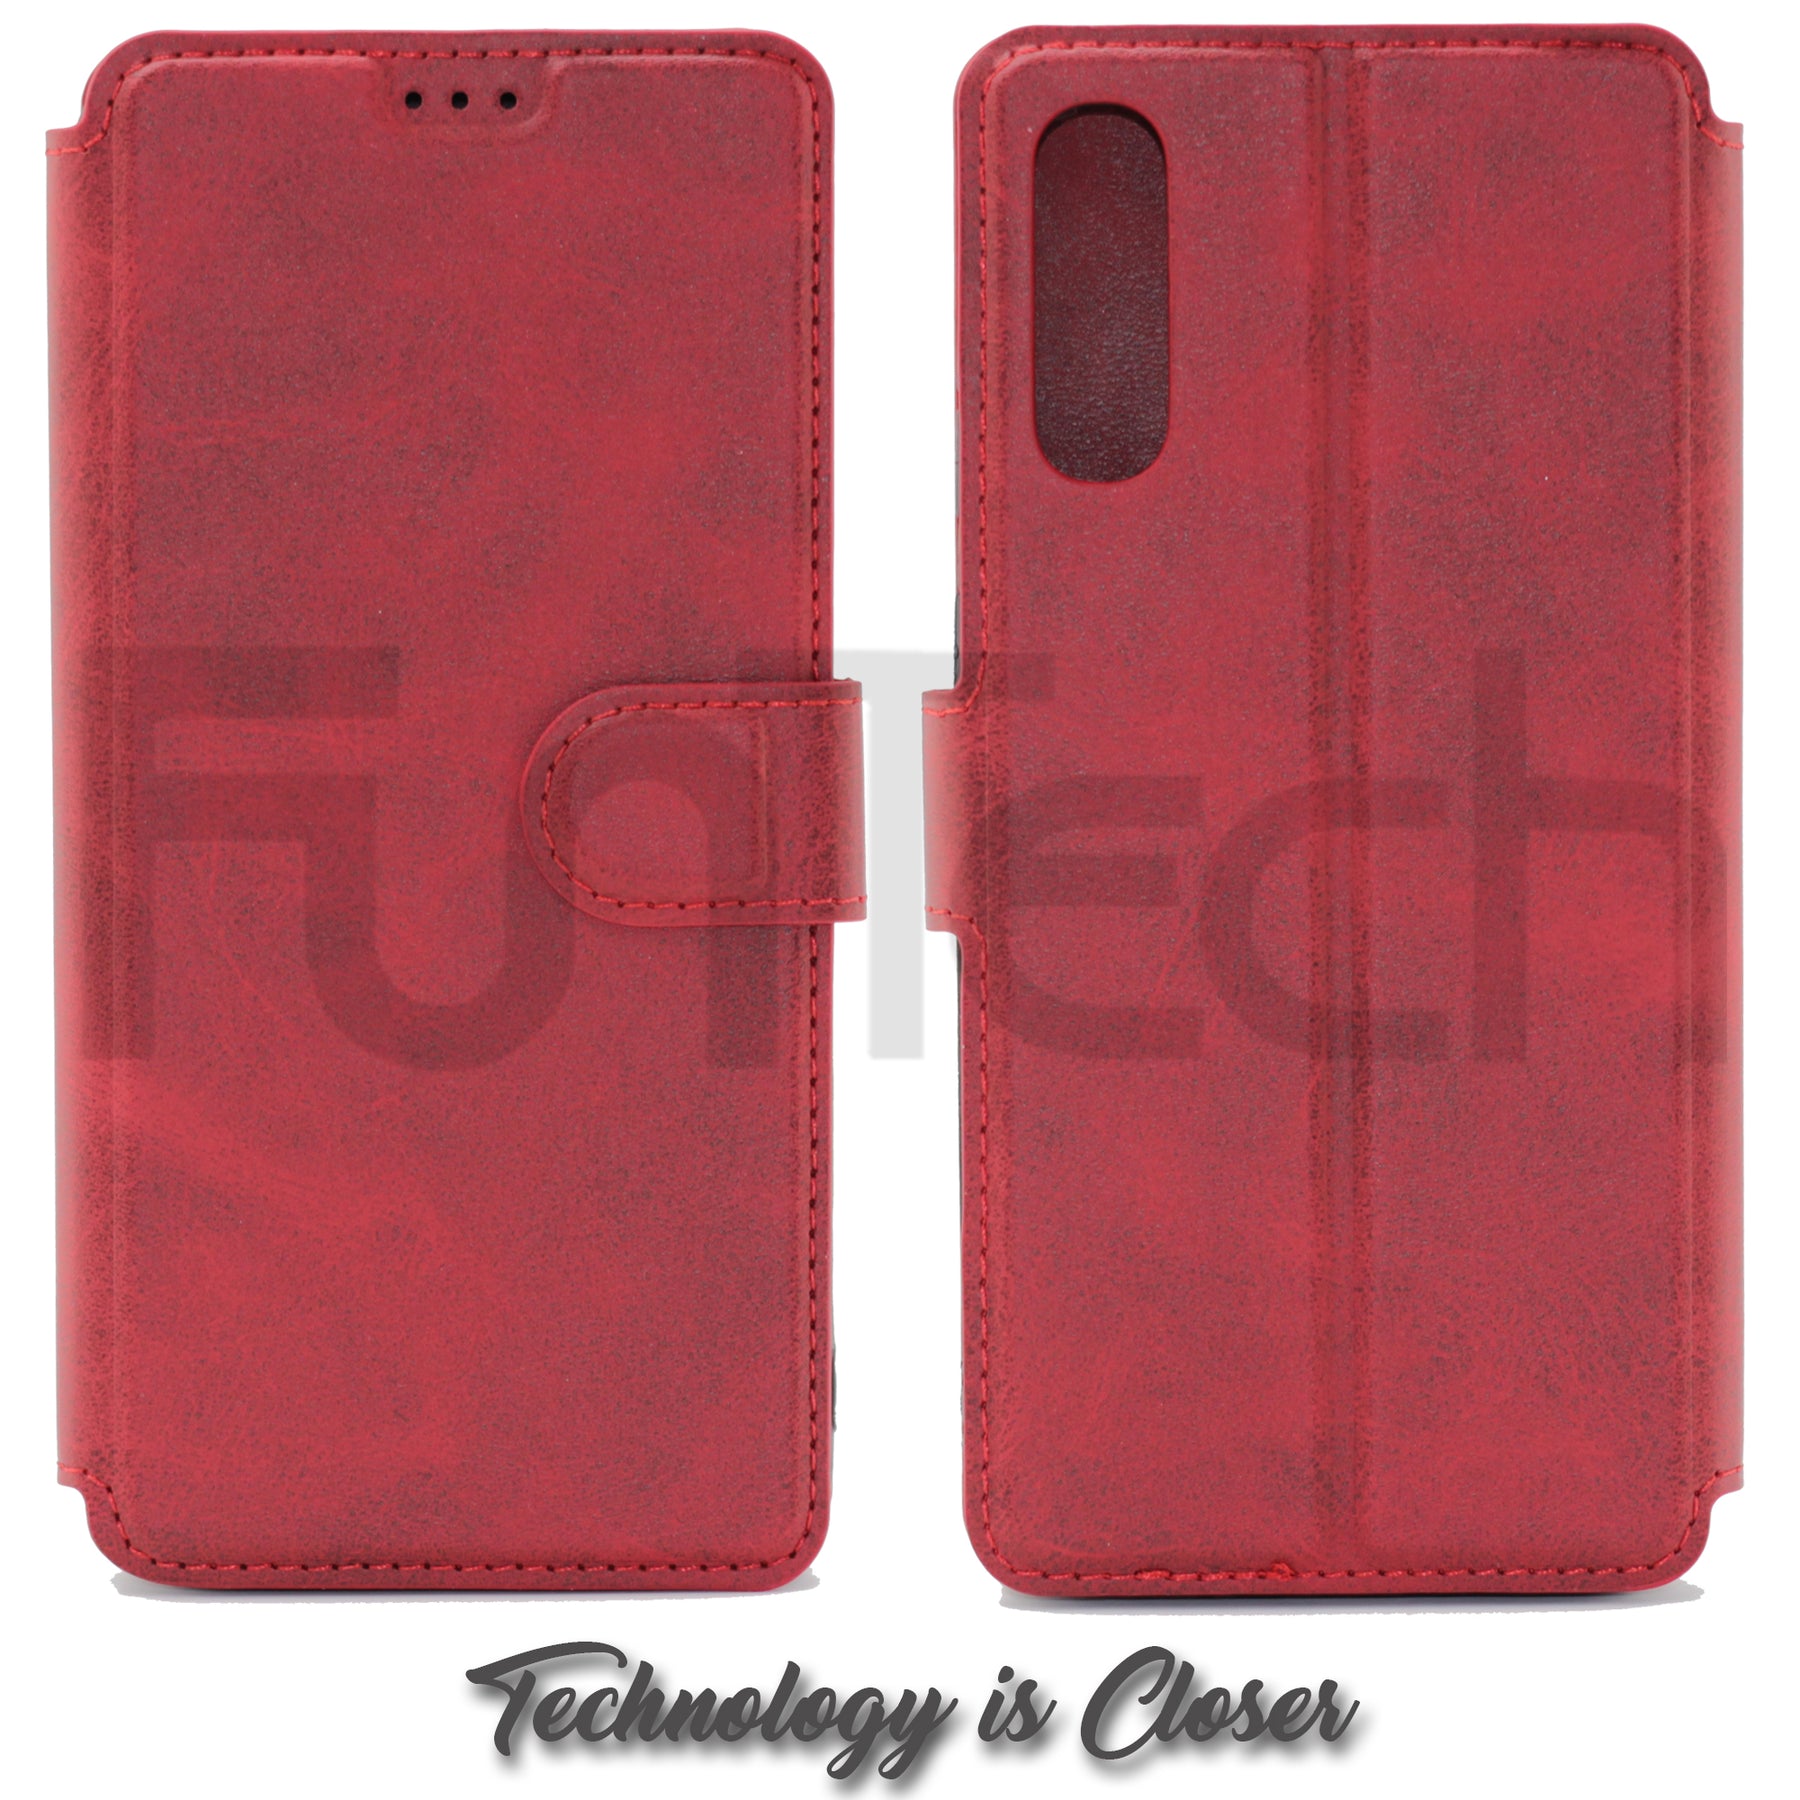 Samsung A50, Leather Wallet Case, Color Red,